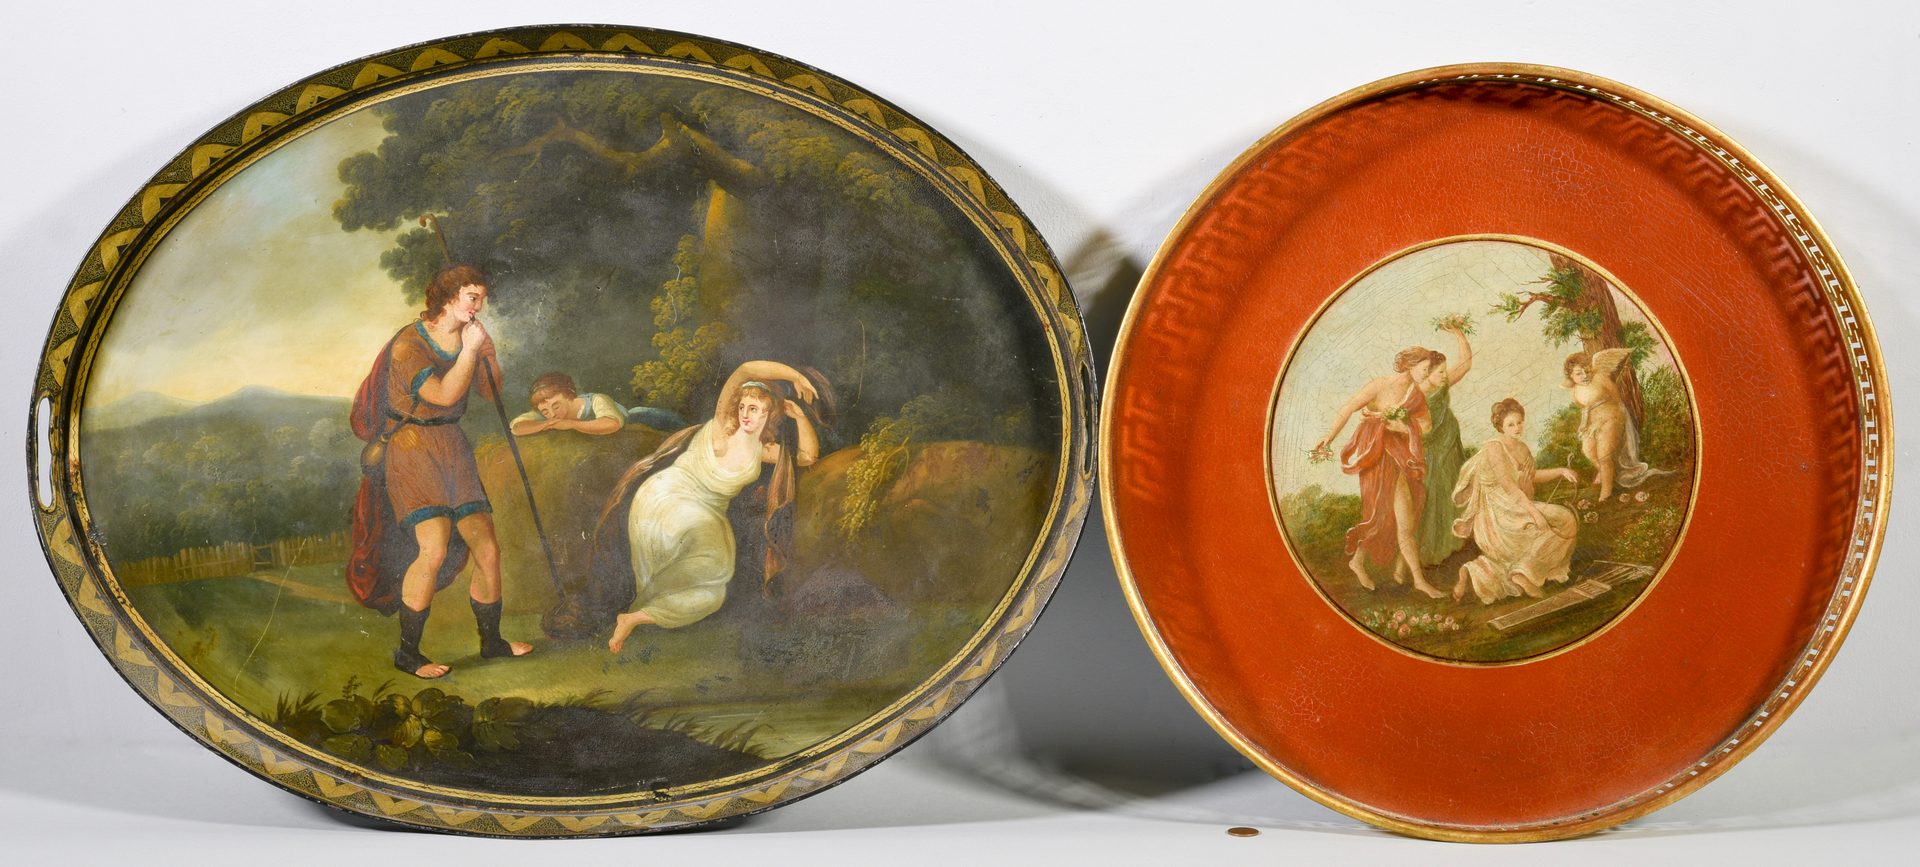 Lot 363: 2 Tole Trays with Classical Scenes